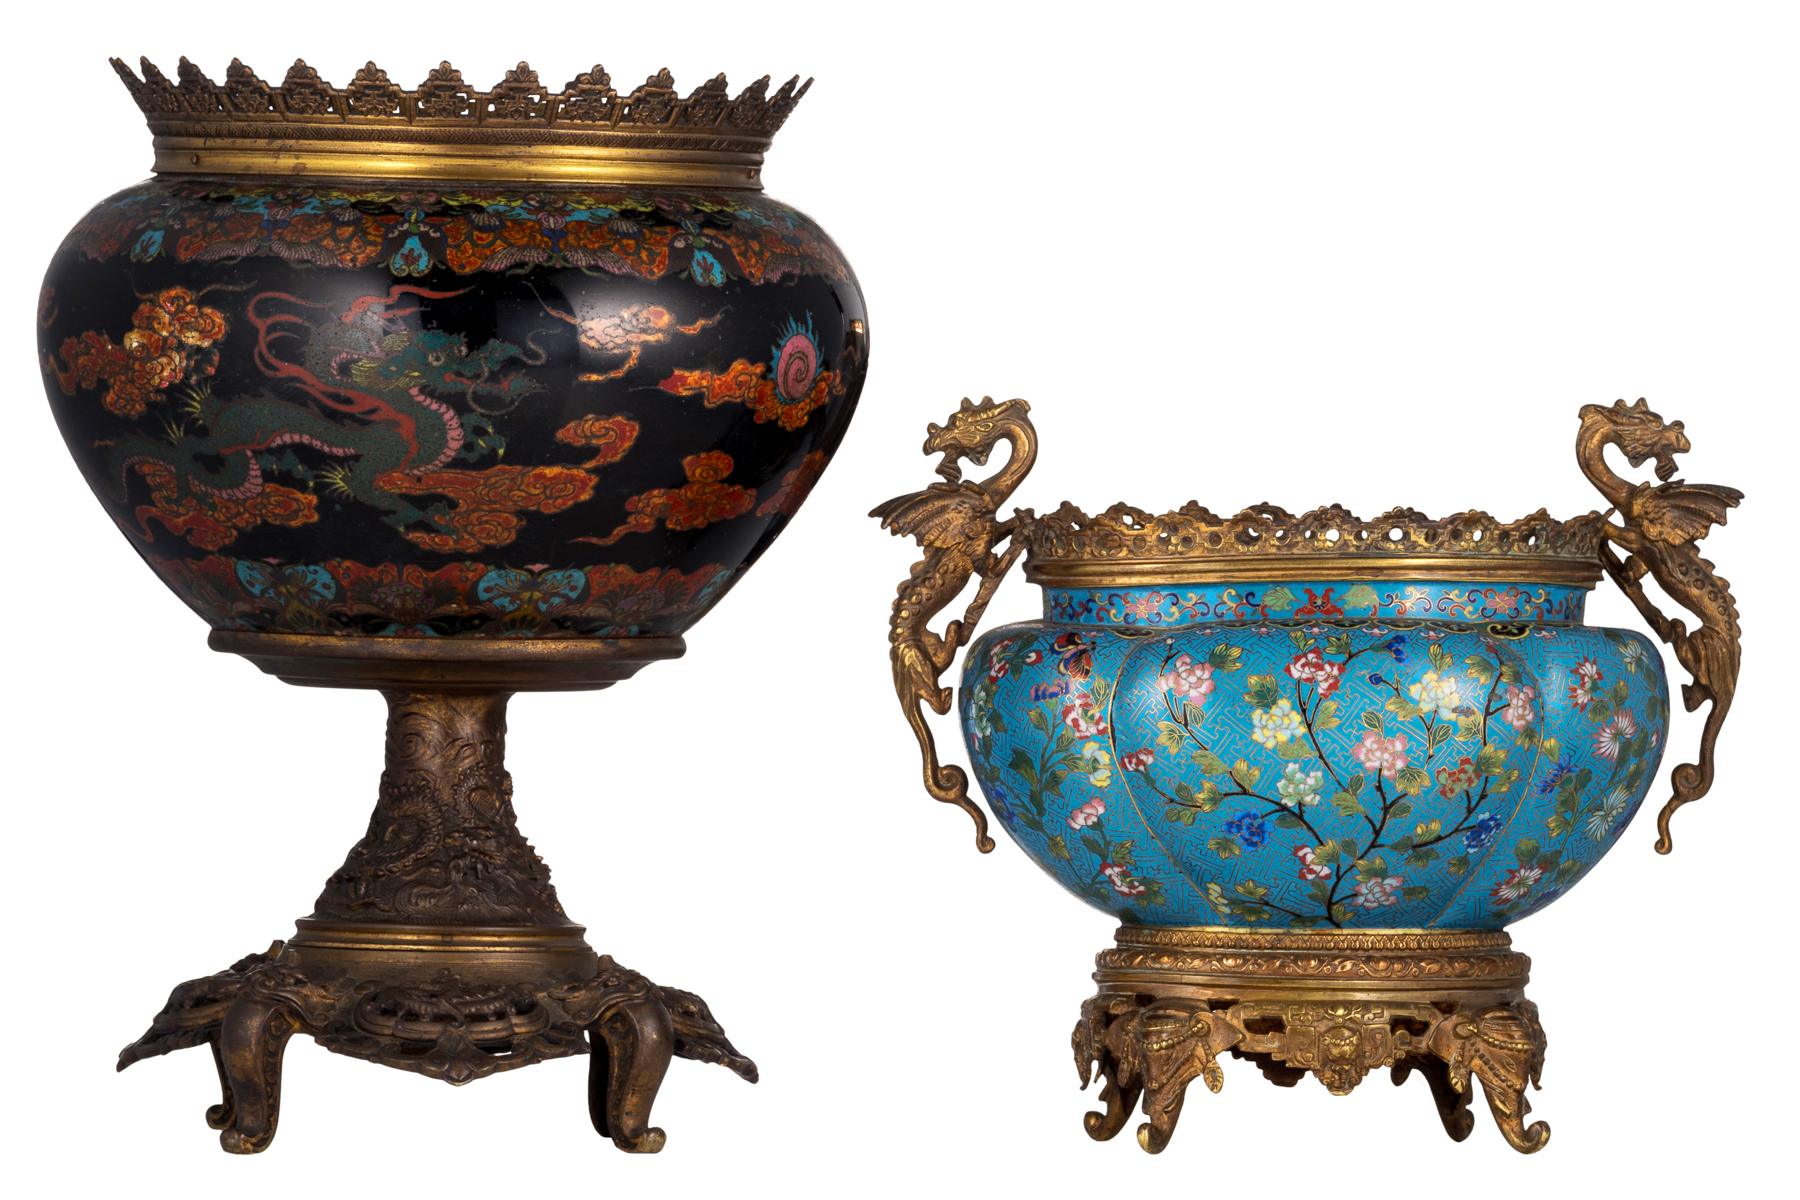 Two Chinese cloisonné enamel jardinieres with bronze mounts, 19th / 20thC, H 27 - 38 - W 31 - ø 29 c